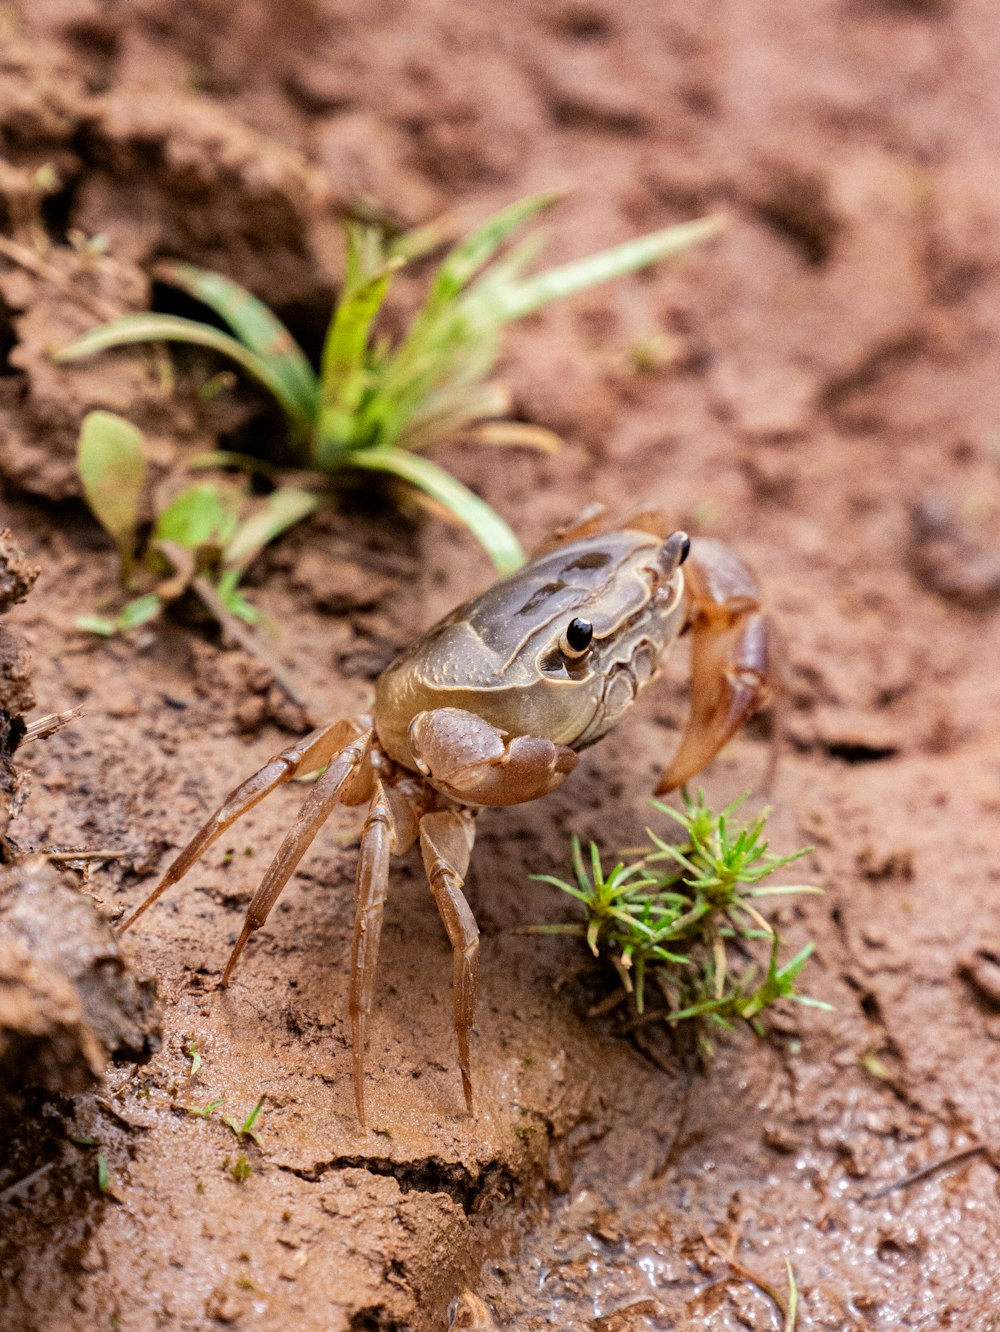 a crab crawling on the ground next to a plant